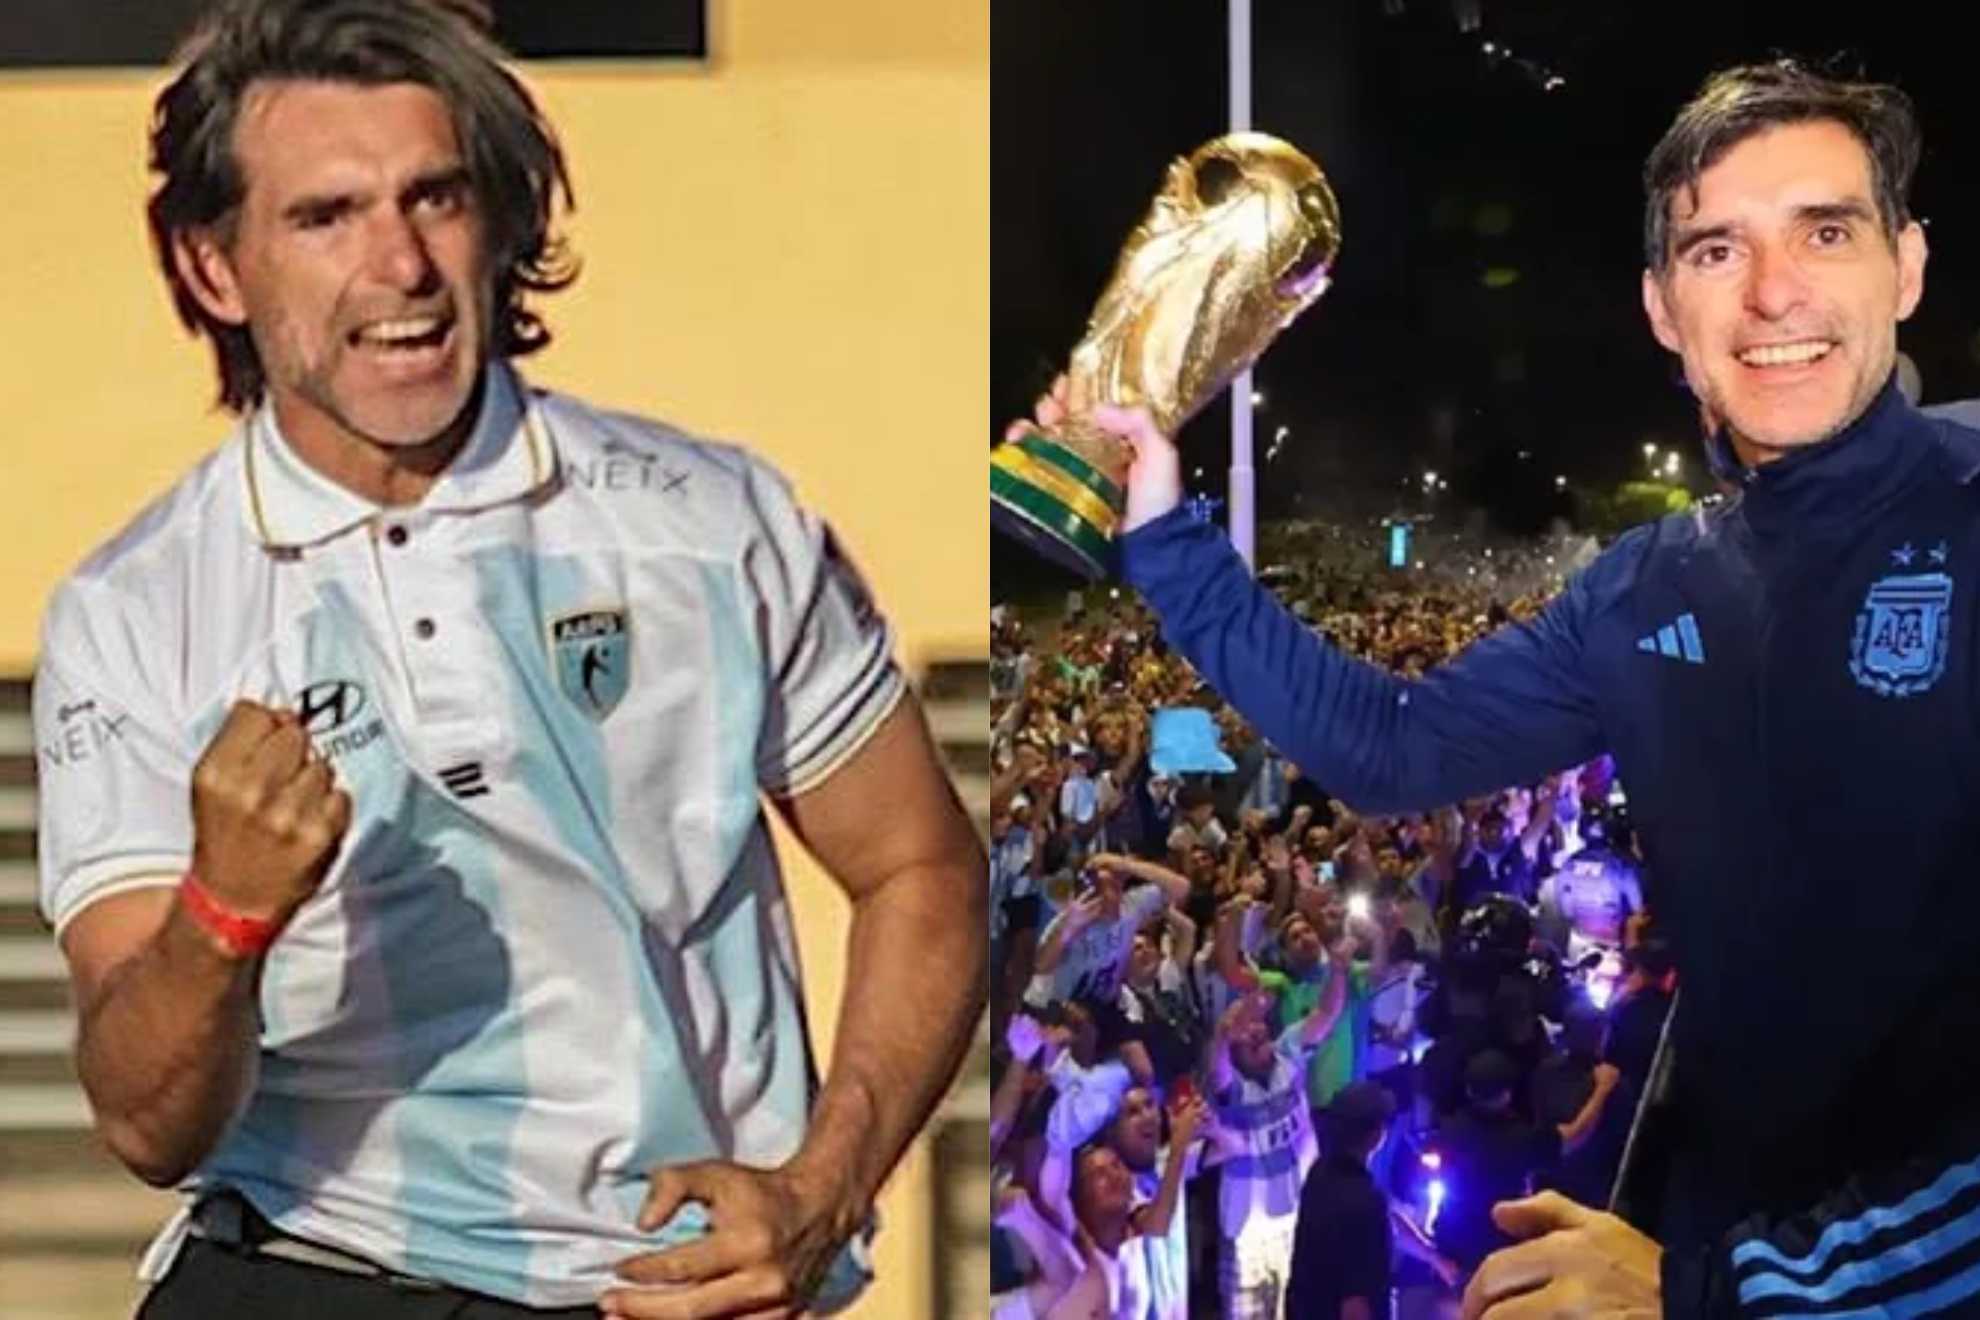 Fabian Ayala (left) celebrating in the 2018 Marrakesh World Cup, (right) with the FIFA World Cup Trophy as part of Argentina's coaching staff in Qatar 2022.